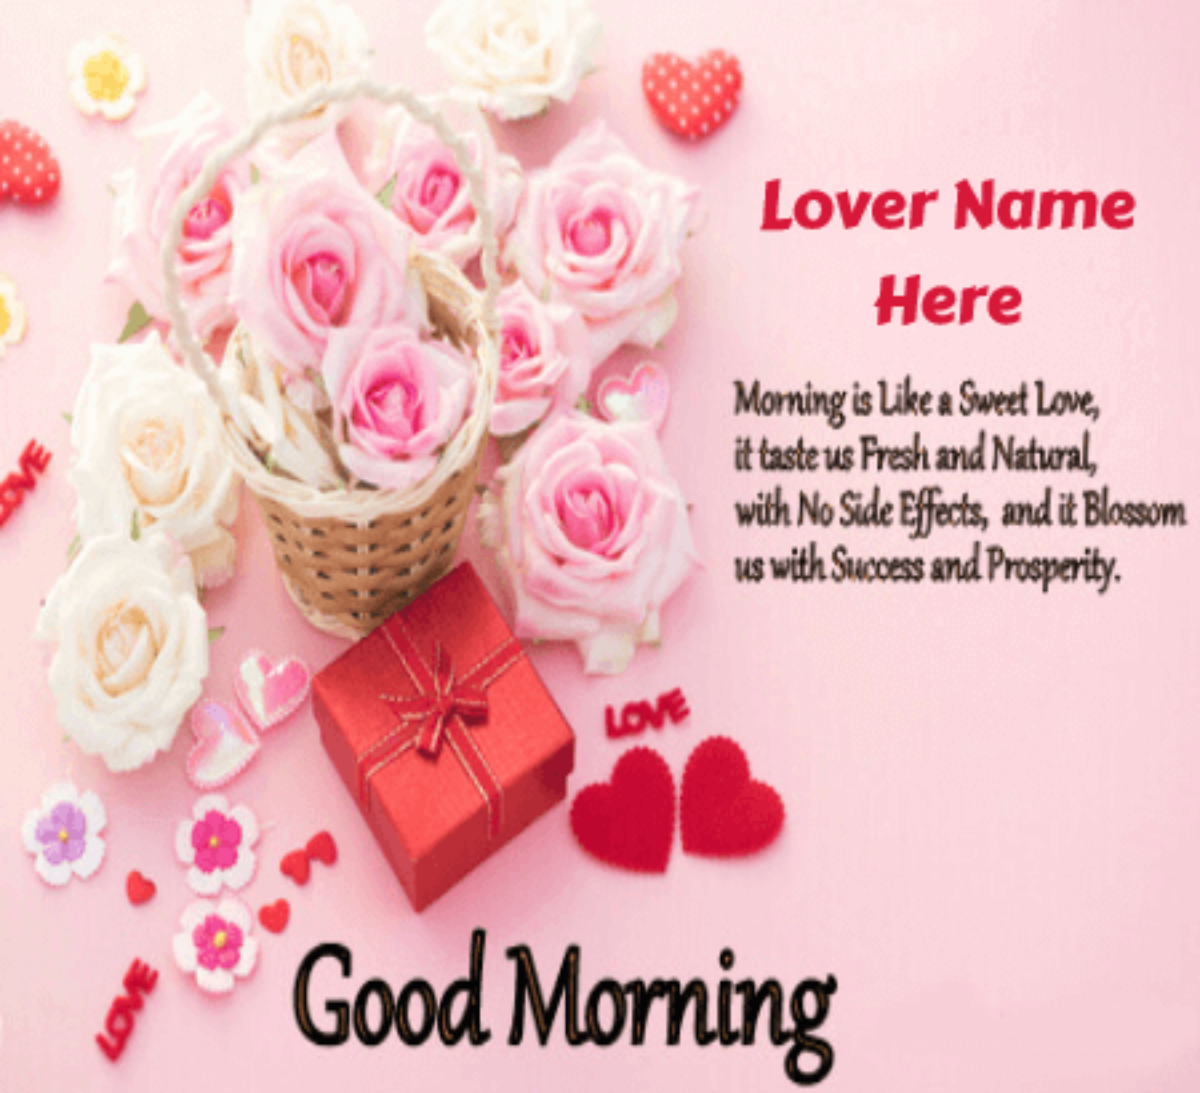 Romantic Morning Saying for Lovers - Good Morning Wishes With Name